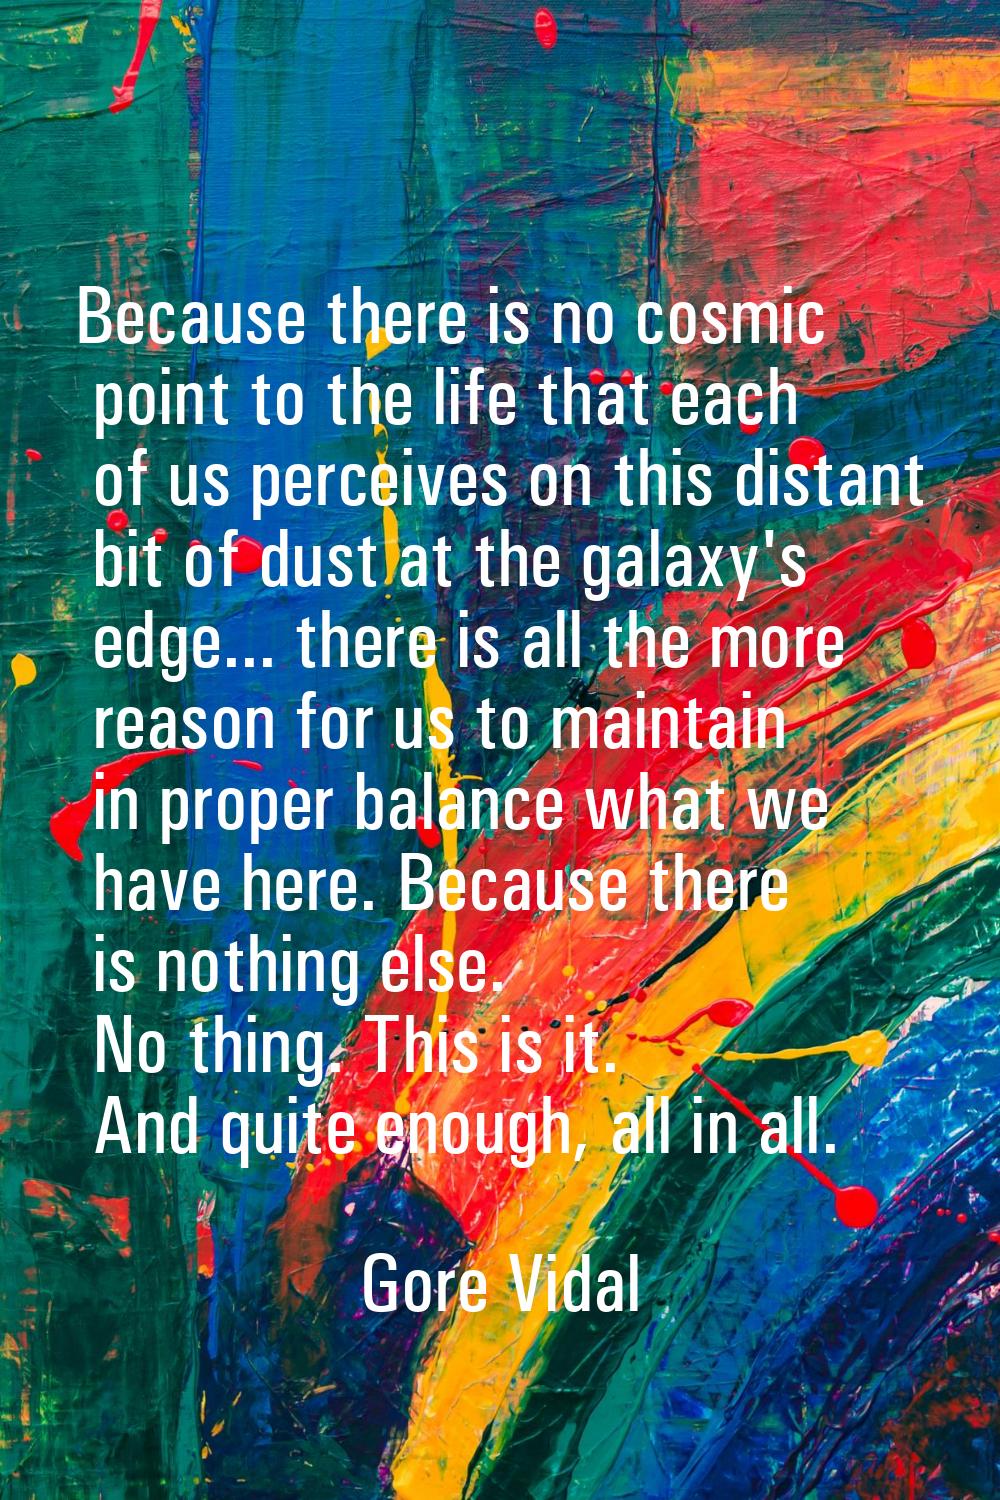 Because there is no cosmic point to the life that each of us perceives on this distant bit of dust 